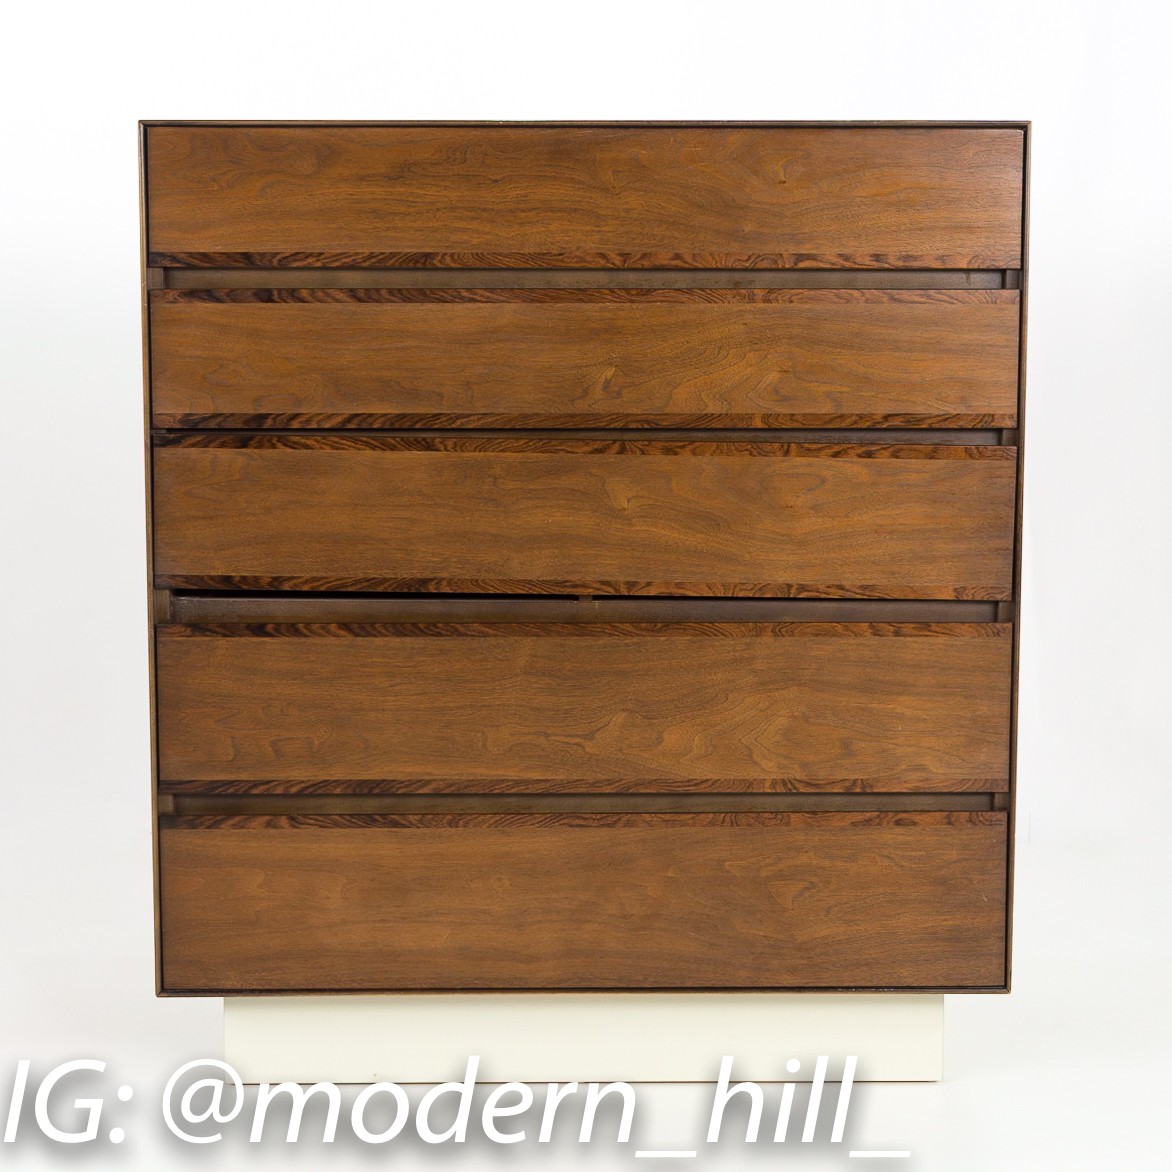 H Paul Browning for Stanley Furniture Walnut and Rosewood Thin Edge Platform 5 Drawer Mid Century Highboy Dresser